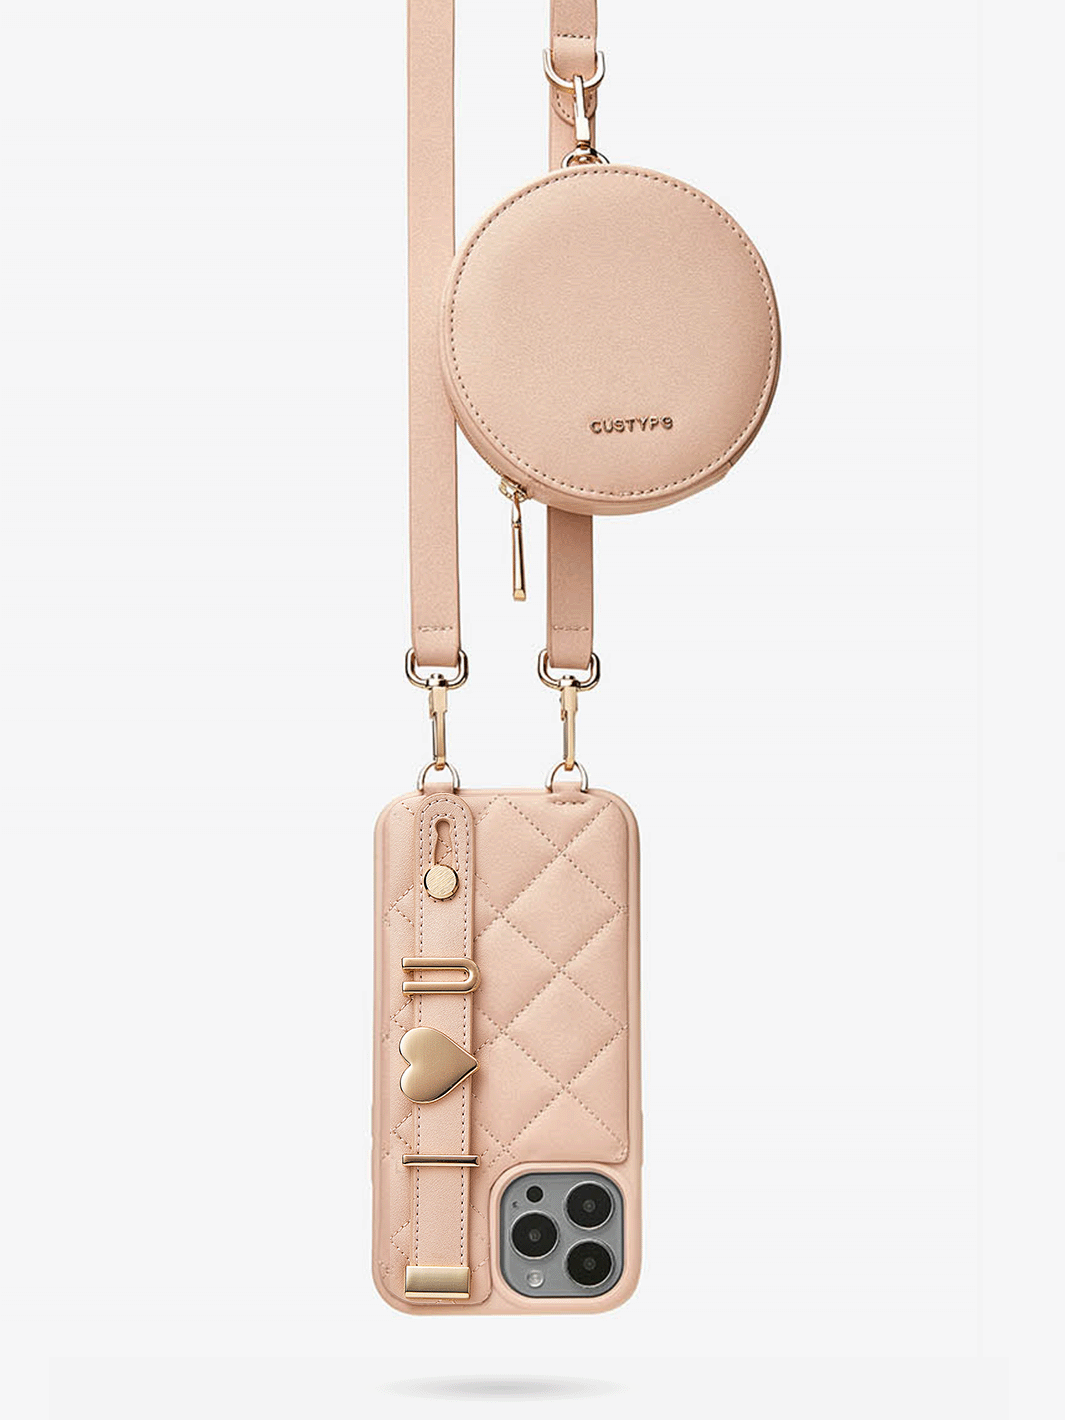 Fashionable, functional, crossbody phone straps – Woman On The Move